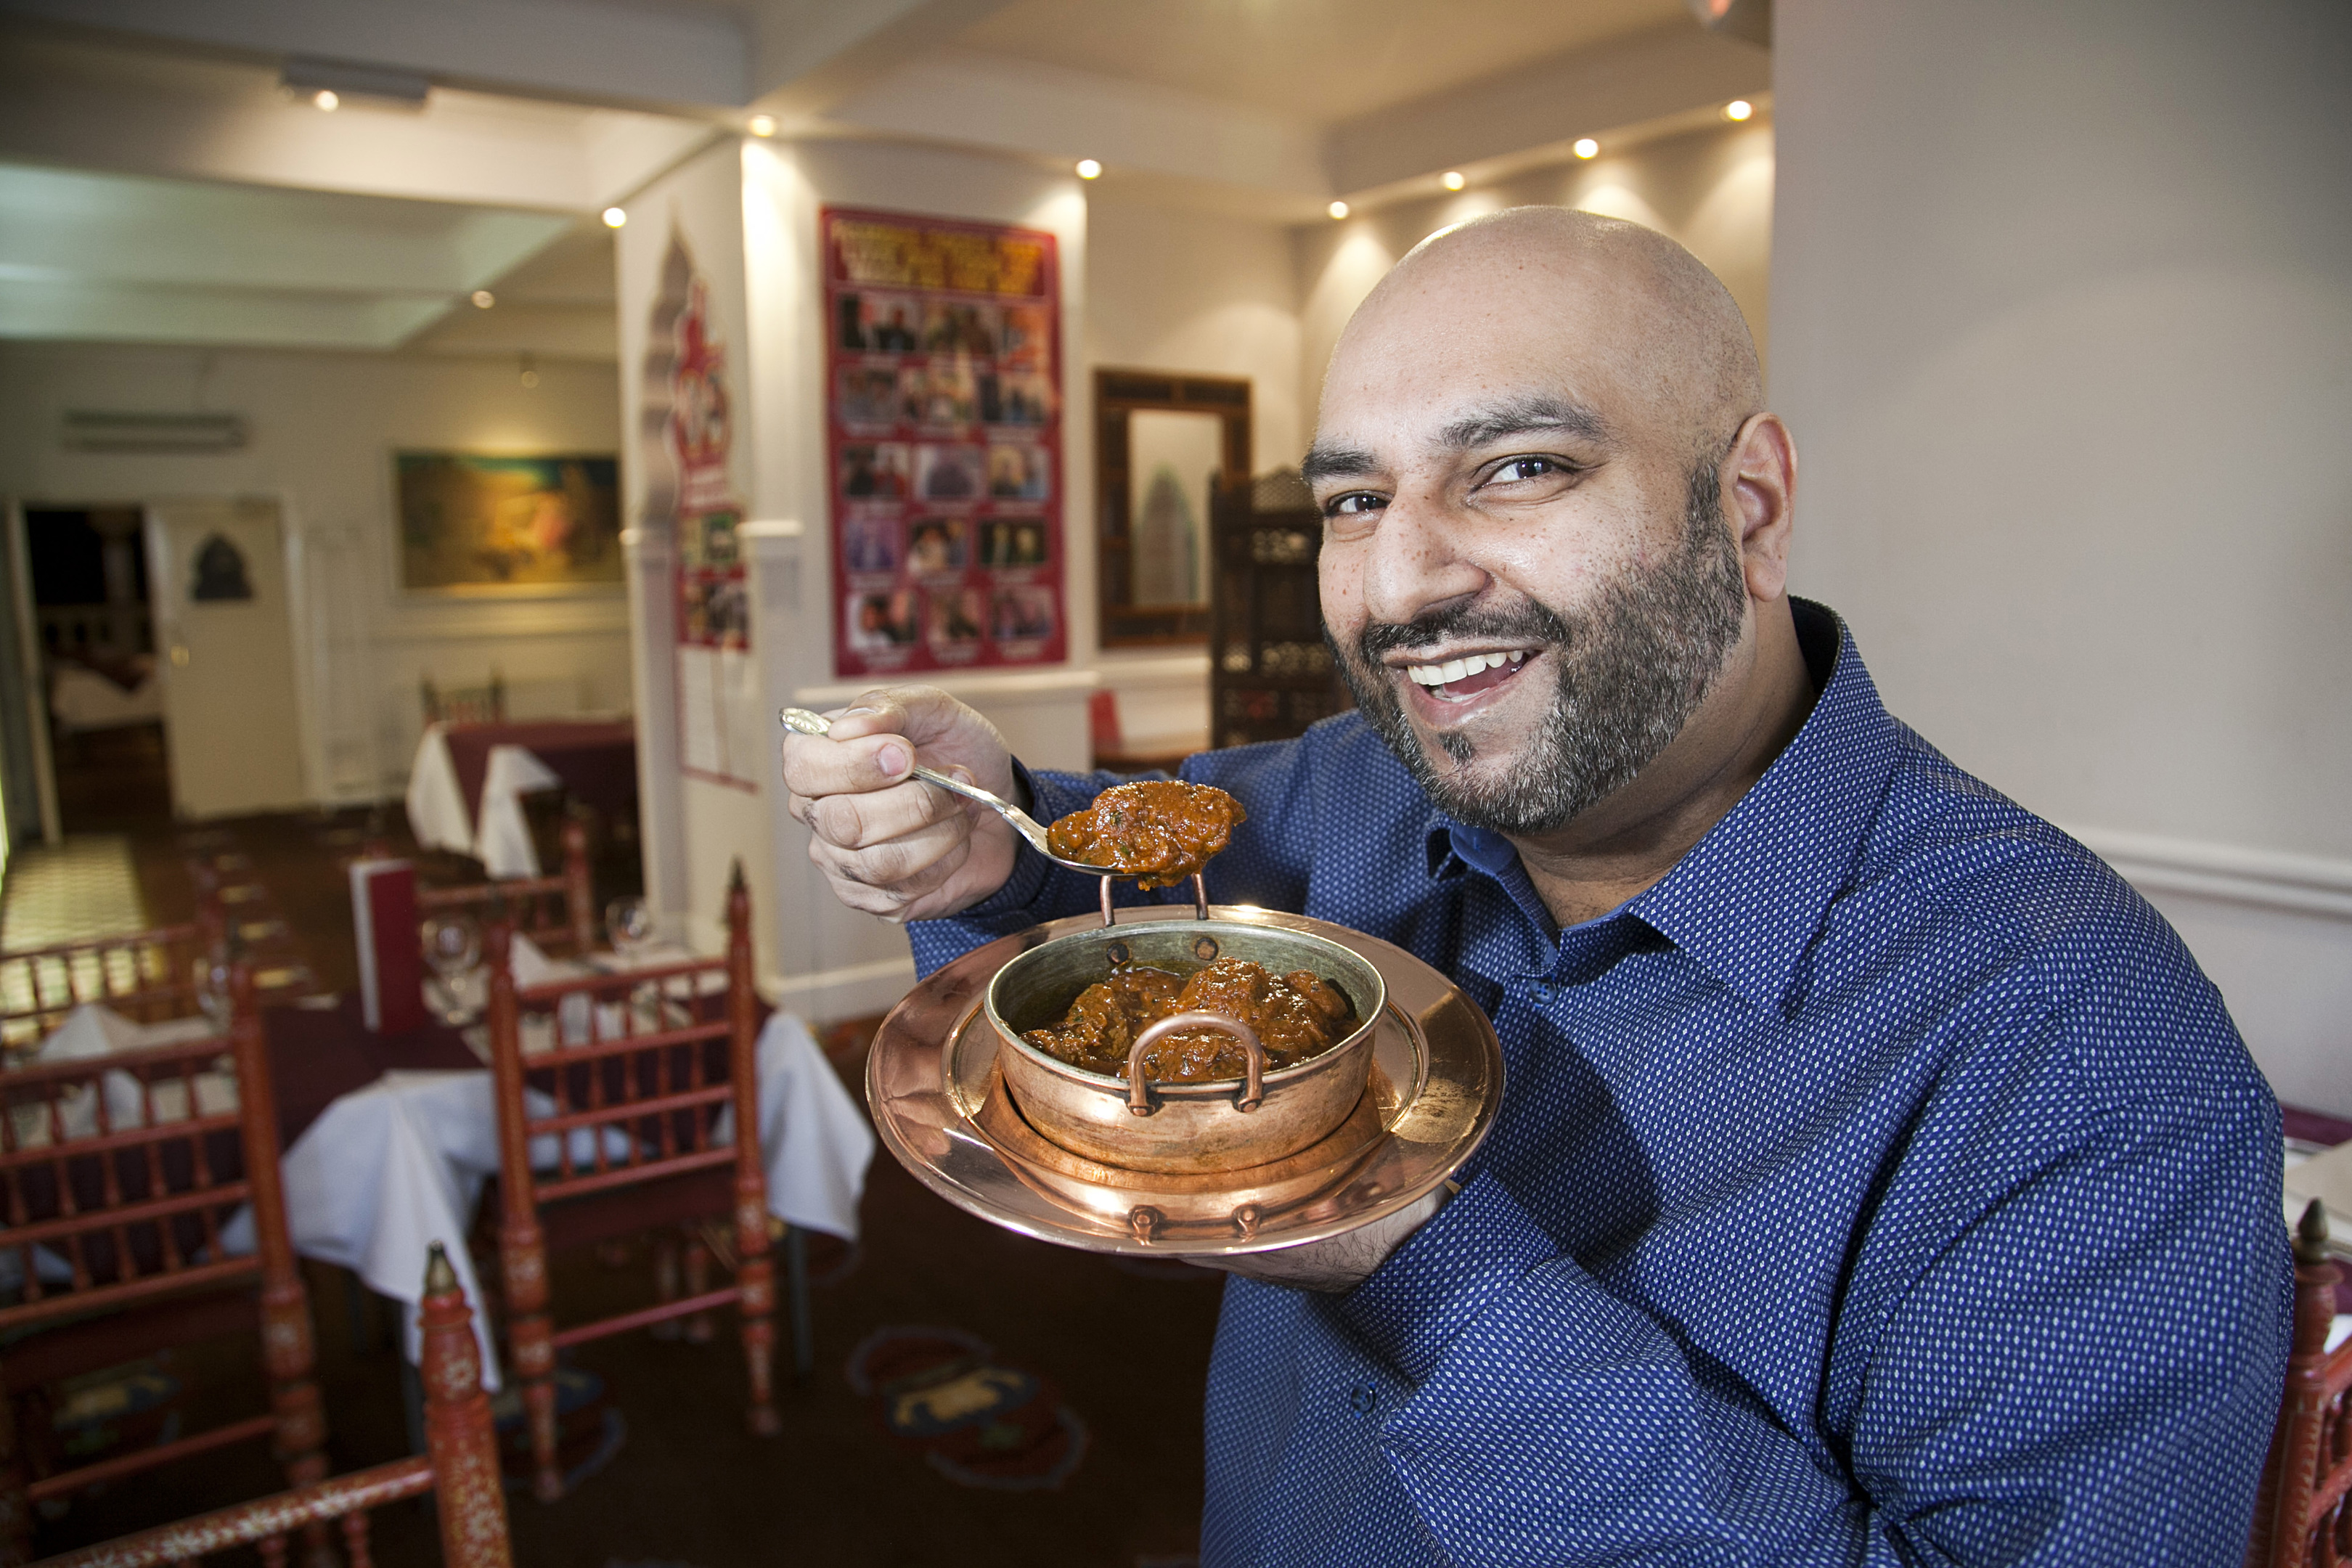 Waseem Tahir, owner of The Koh-I-Noor and author of a book about curries called The Full Bhoona (Alistair Linford)